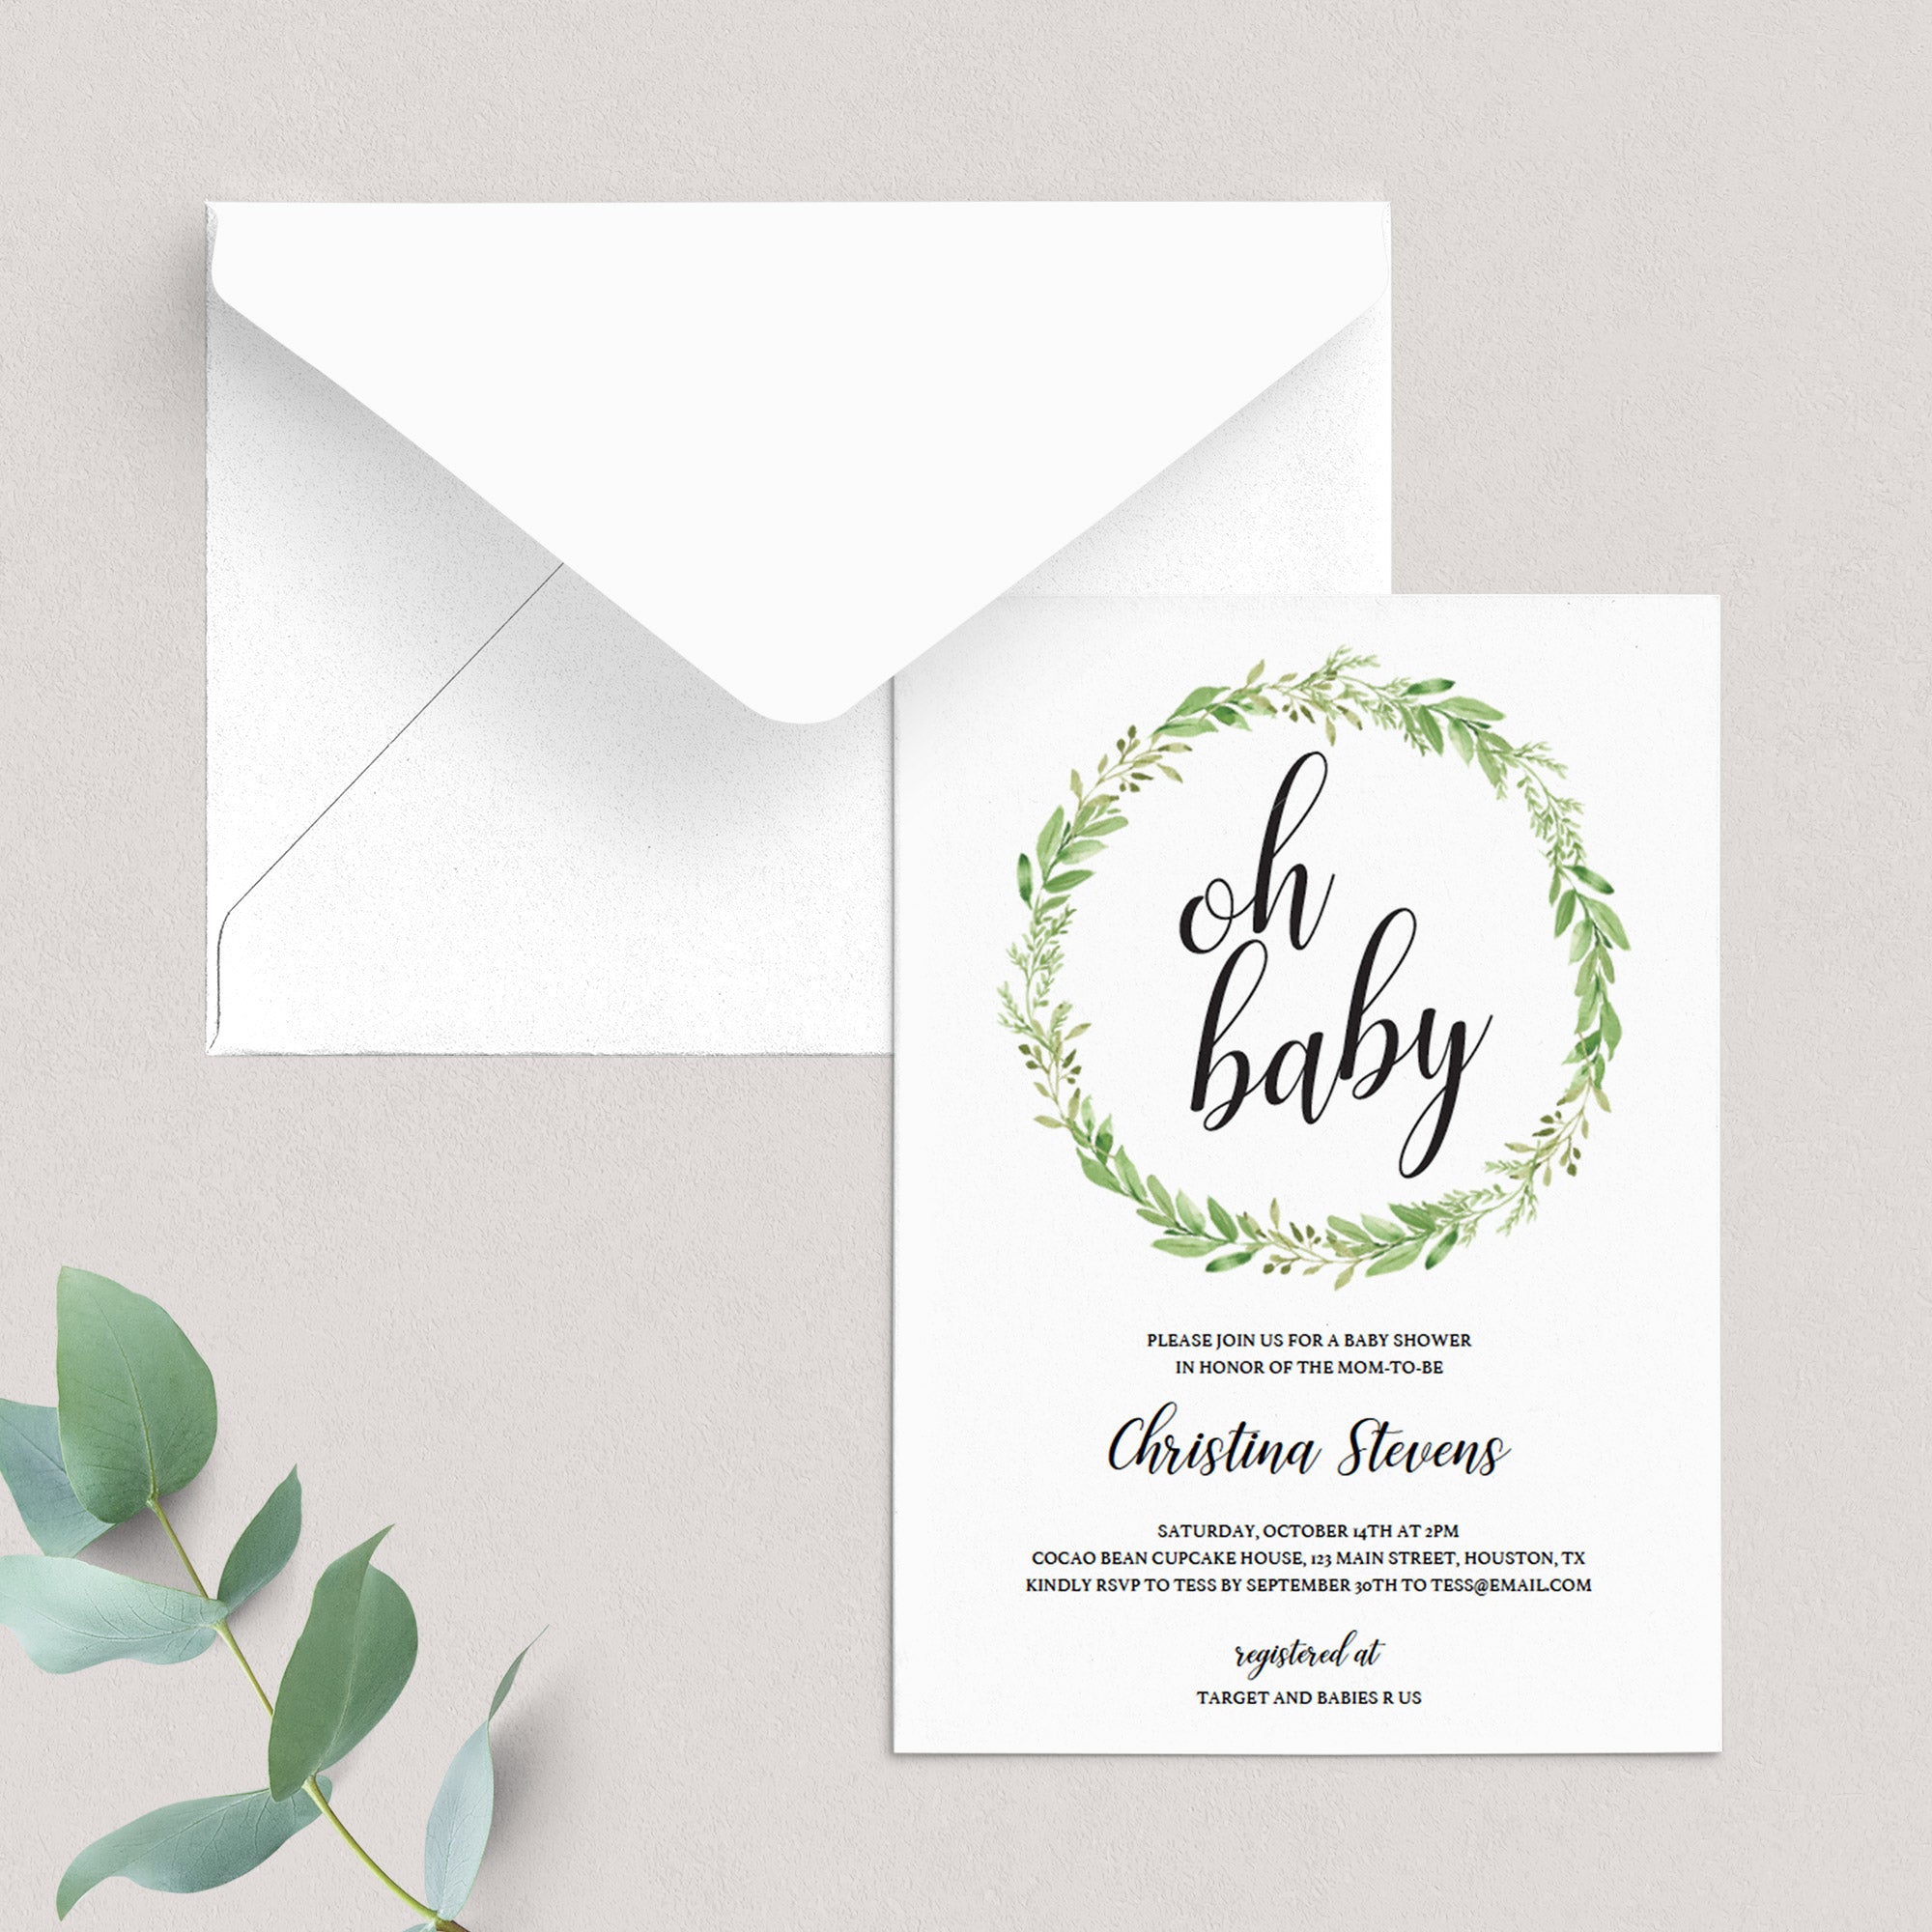 Oh Baby Baby Shower Invitation Template by LittleSizzle